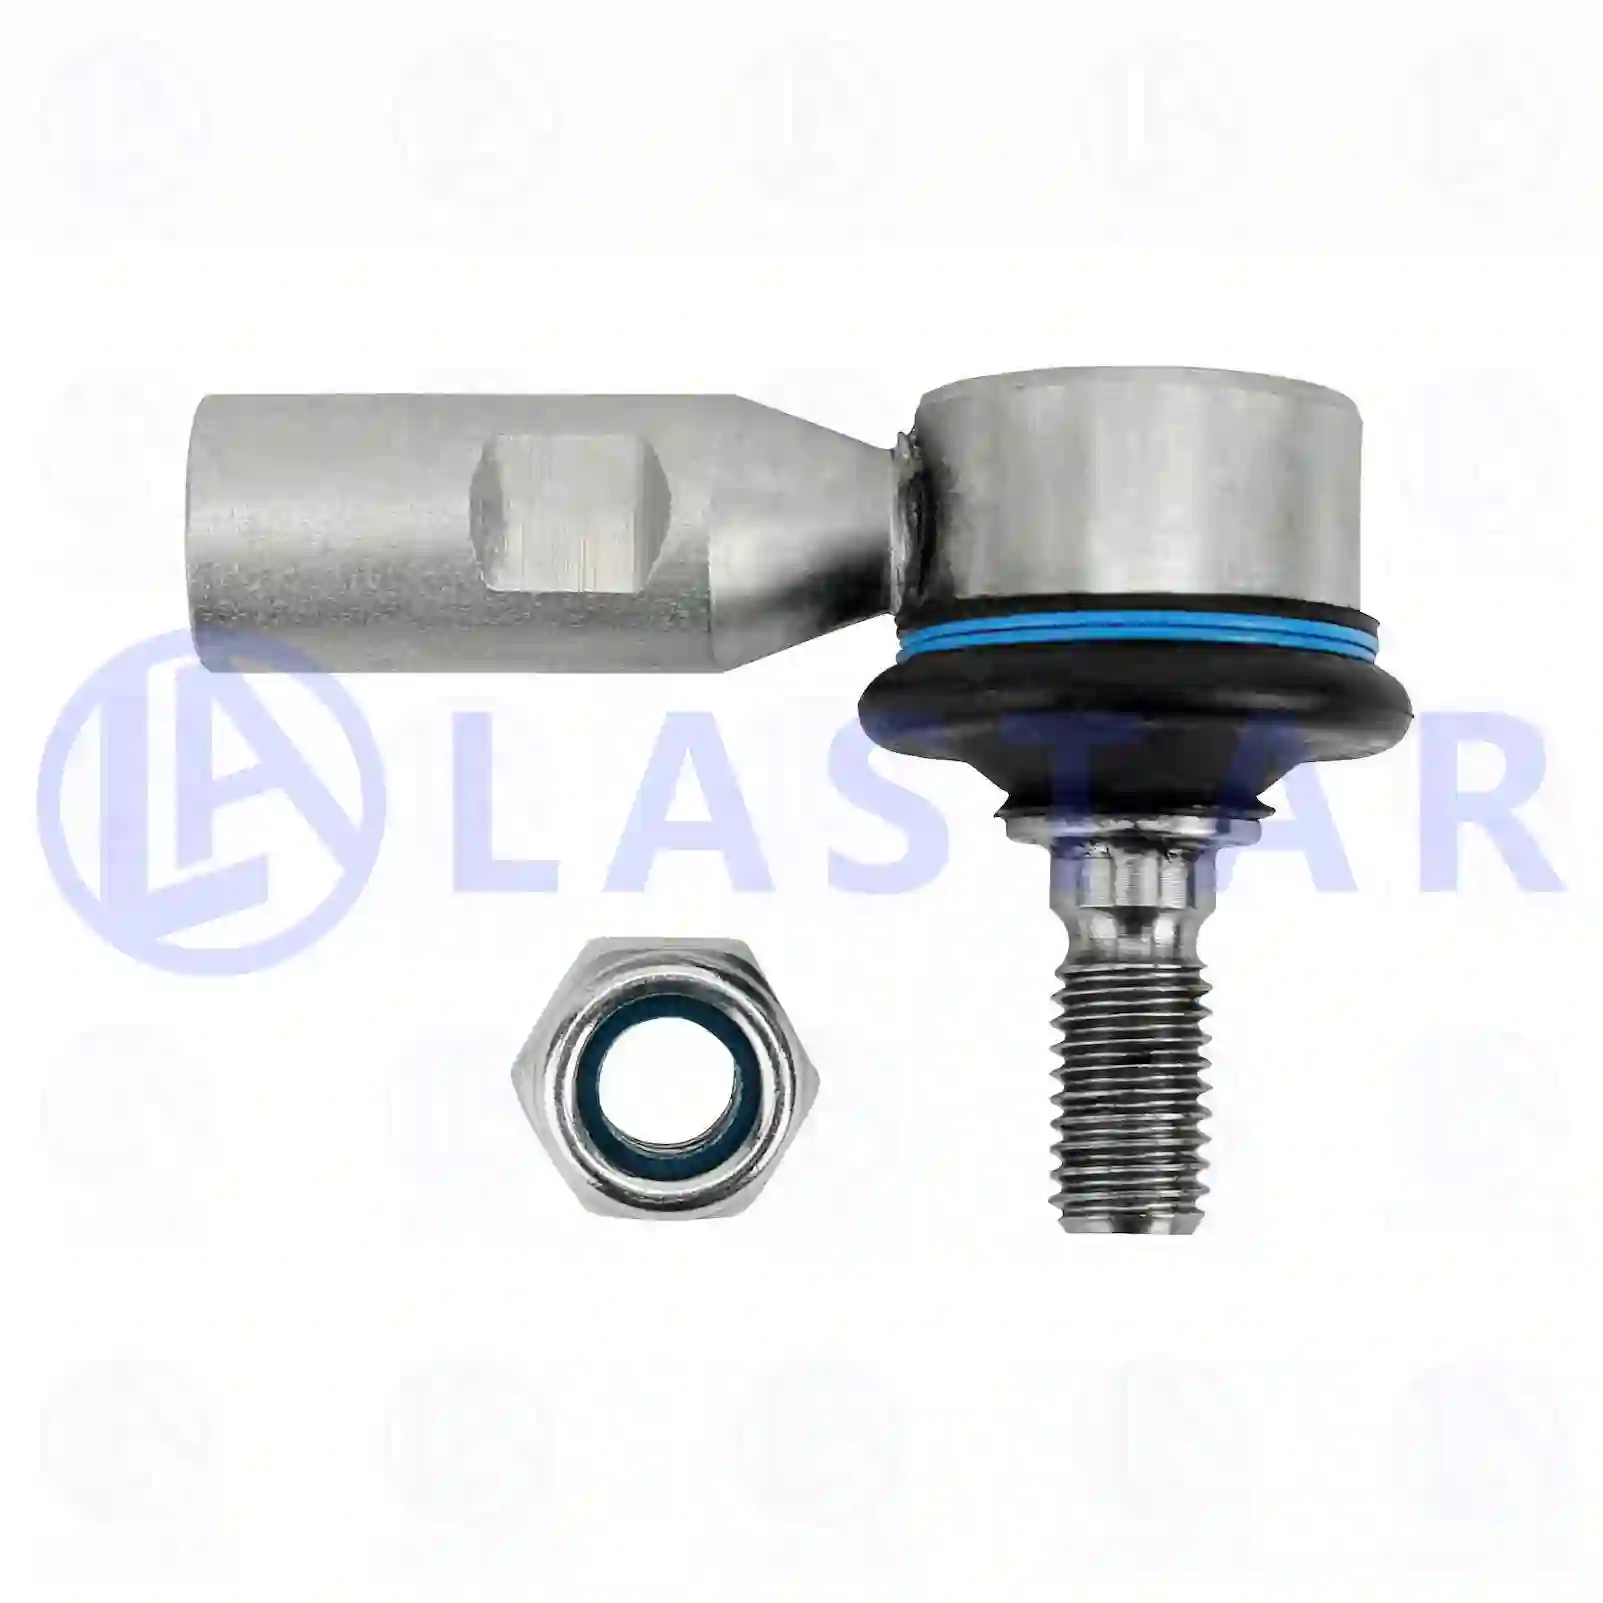 Gear Shift Lever Ball joint, right hand thread, la no: 77732036 ,  oem no:0009965045, 0009965545, 0009967545, 0019963045, 3849960145, 9412601489, ZG40145-0008 Lastar Spare Part | Truck Spare Parts, Auotomotive Spare Parts